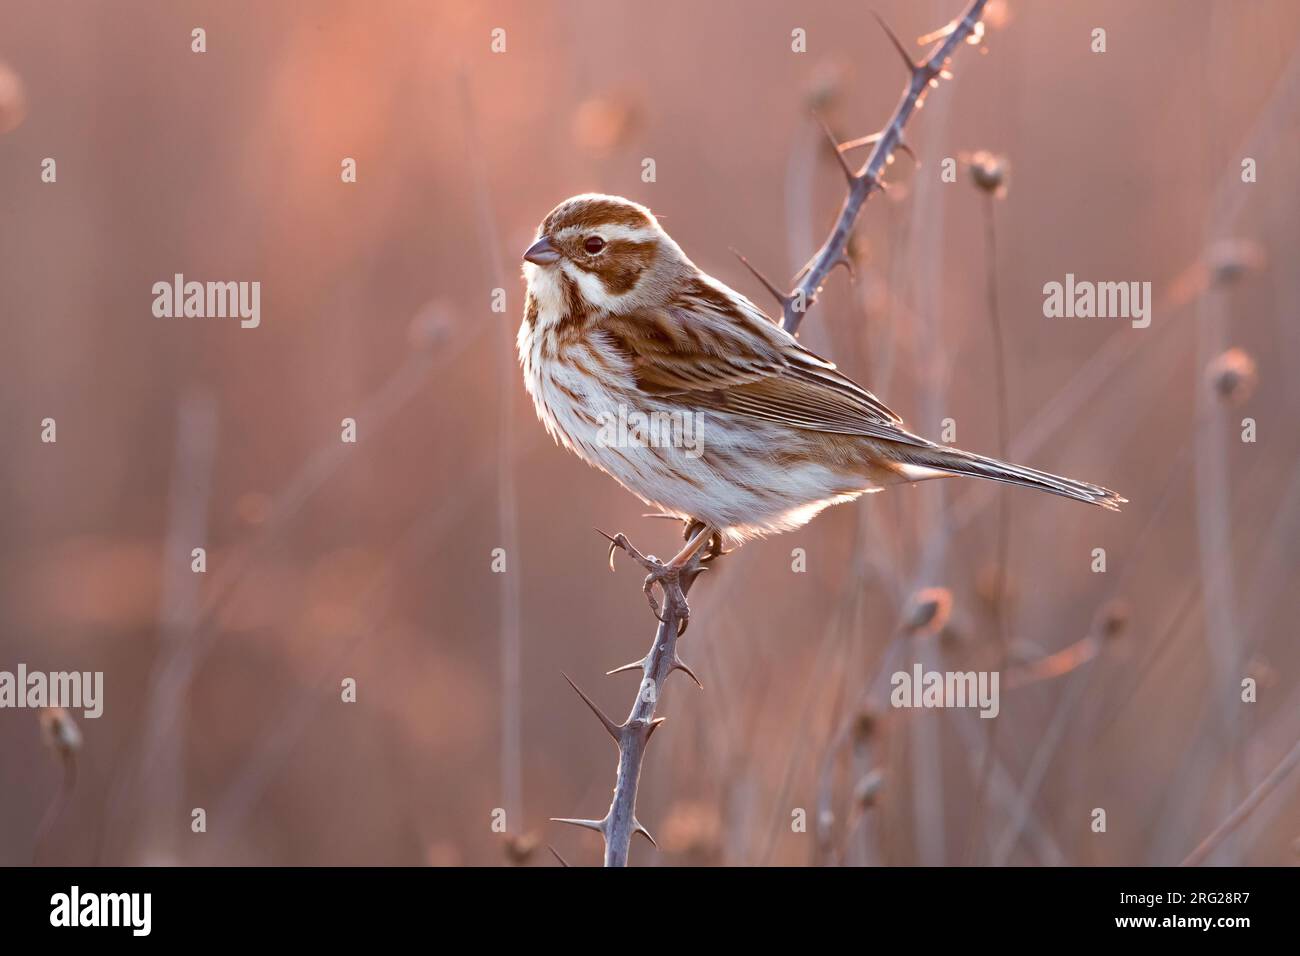 Wintering Common Reed Bunting (Emberiza schoeniclus) perched on a small twig in a rural field in Italy. Photographed with backlight. Stock Photo